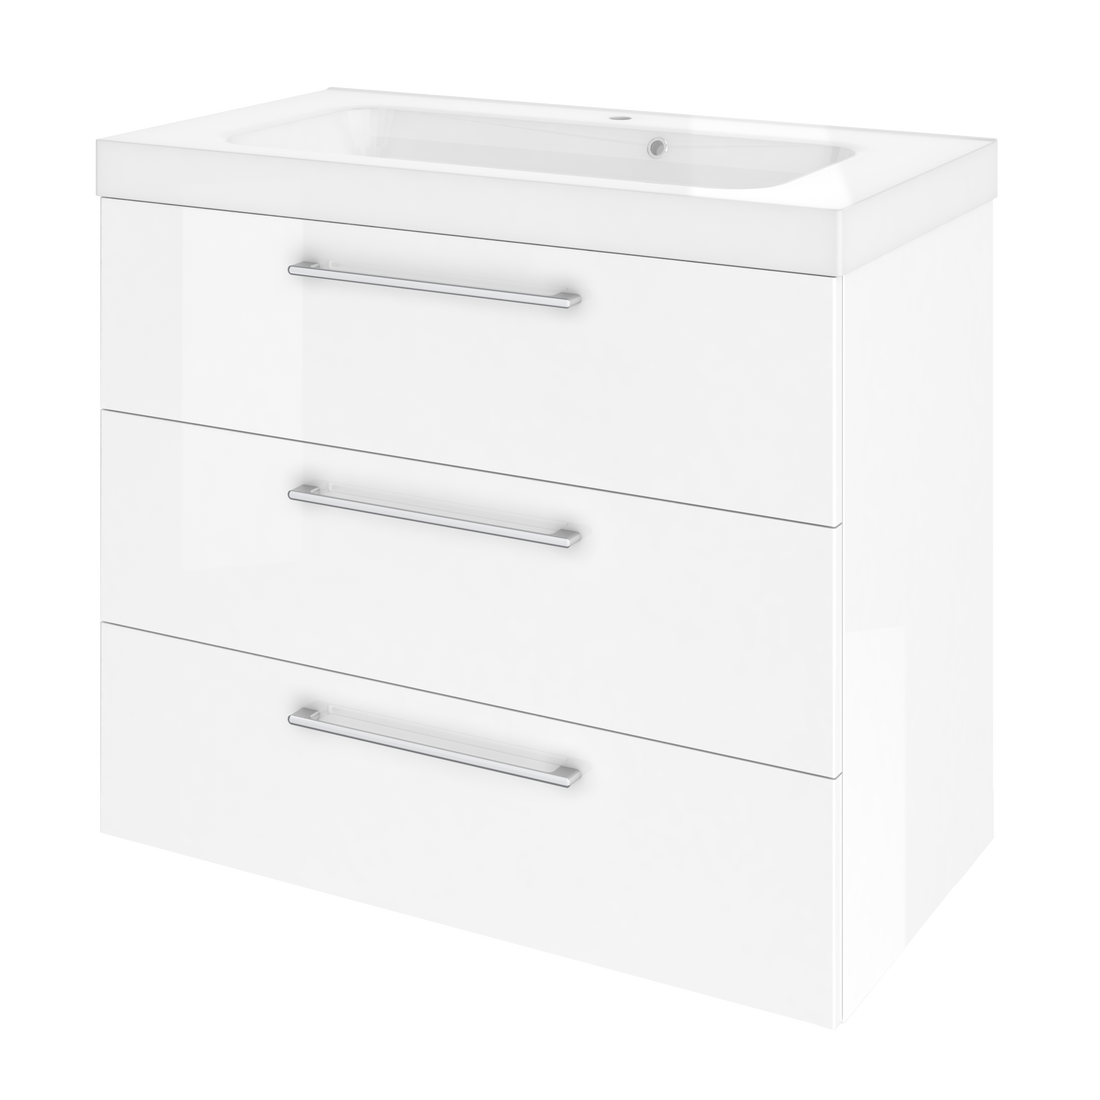 CABINET REMIX 90 3 DRAWERS GLOSSY WHITE L90 H58 P46